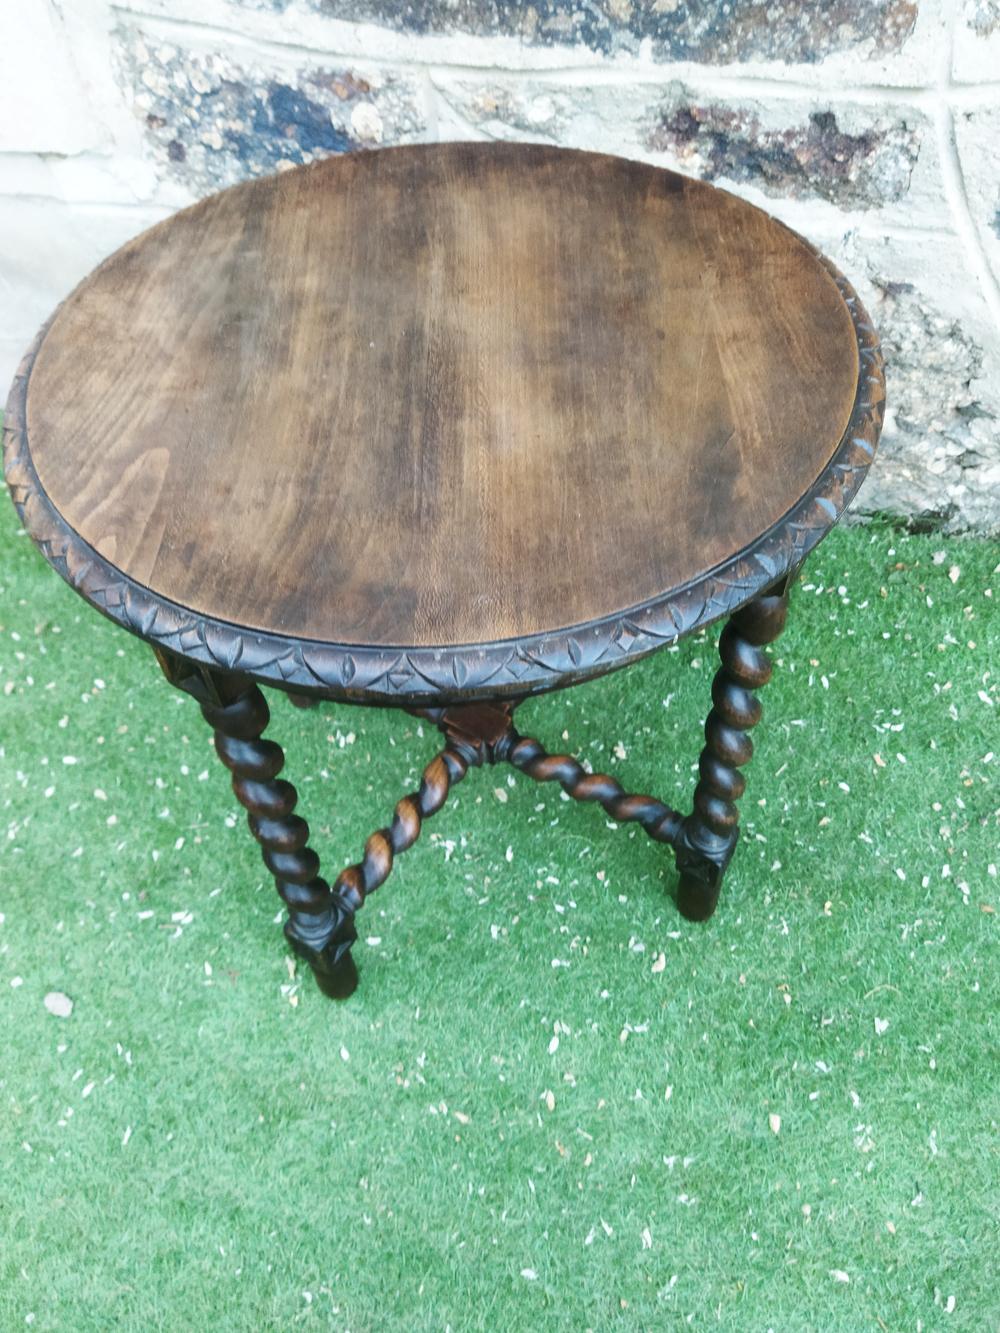 Round side table features barley twist legs, 19th or 18th century  

It is a typical table of the Spanish Renaissance,. Possibly very old, but I cannot specify the exact concrete date. This is Europe, here we live with furniture and buildings that